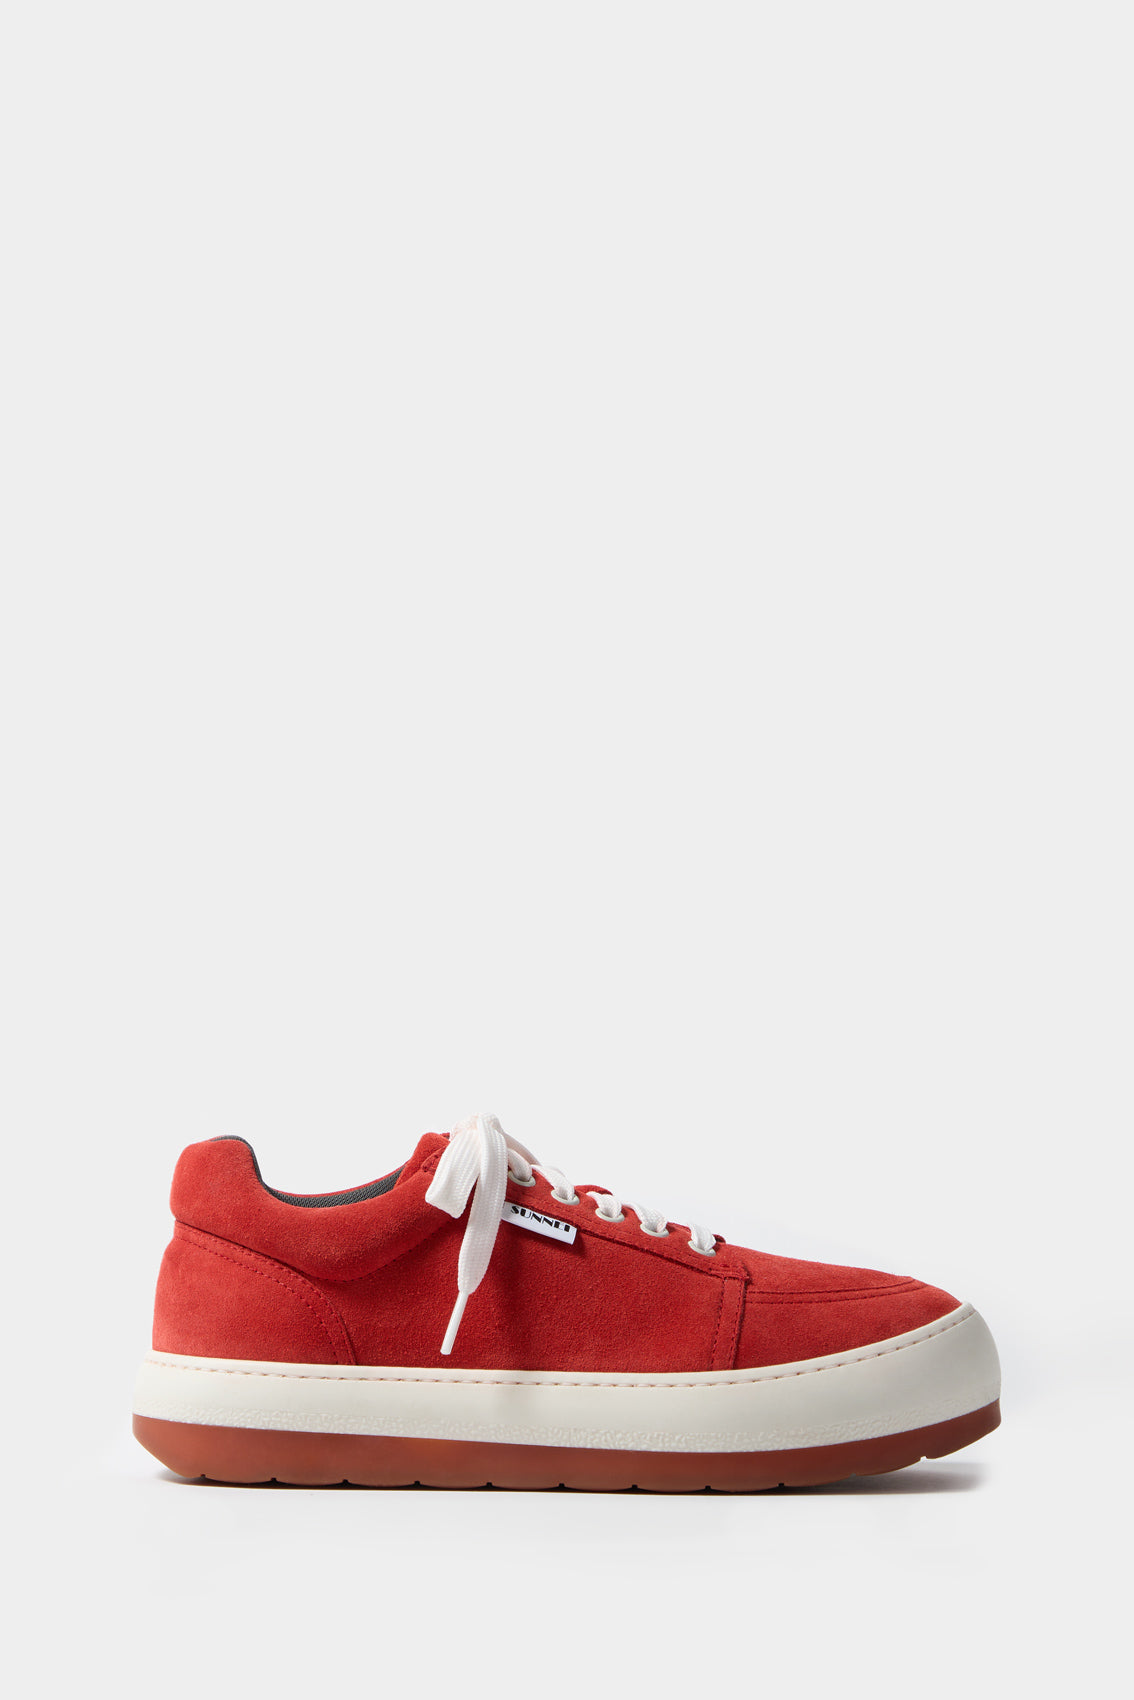 DREAMY SHOES / suede / red – SUNNEI